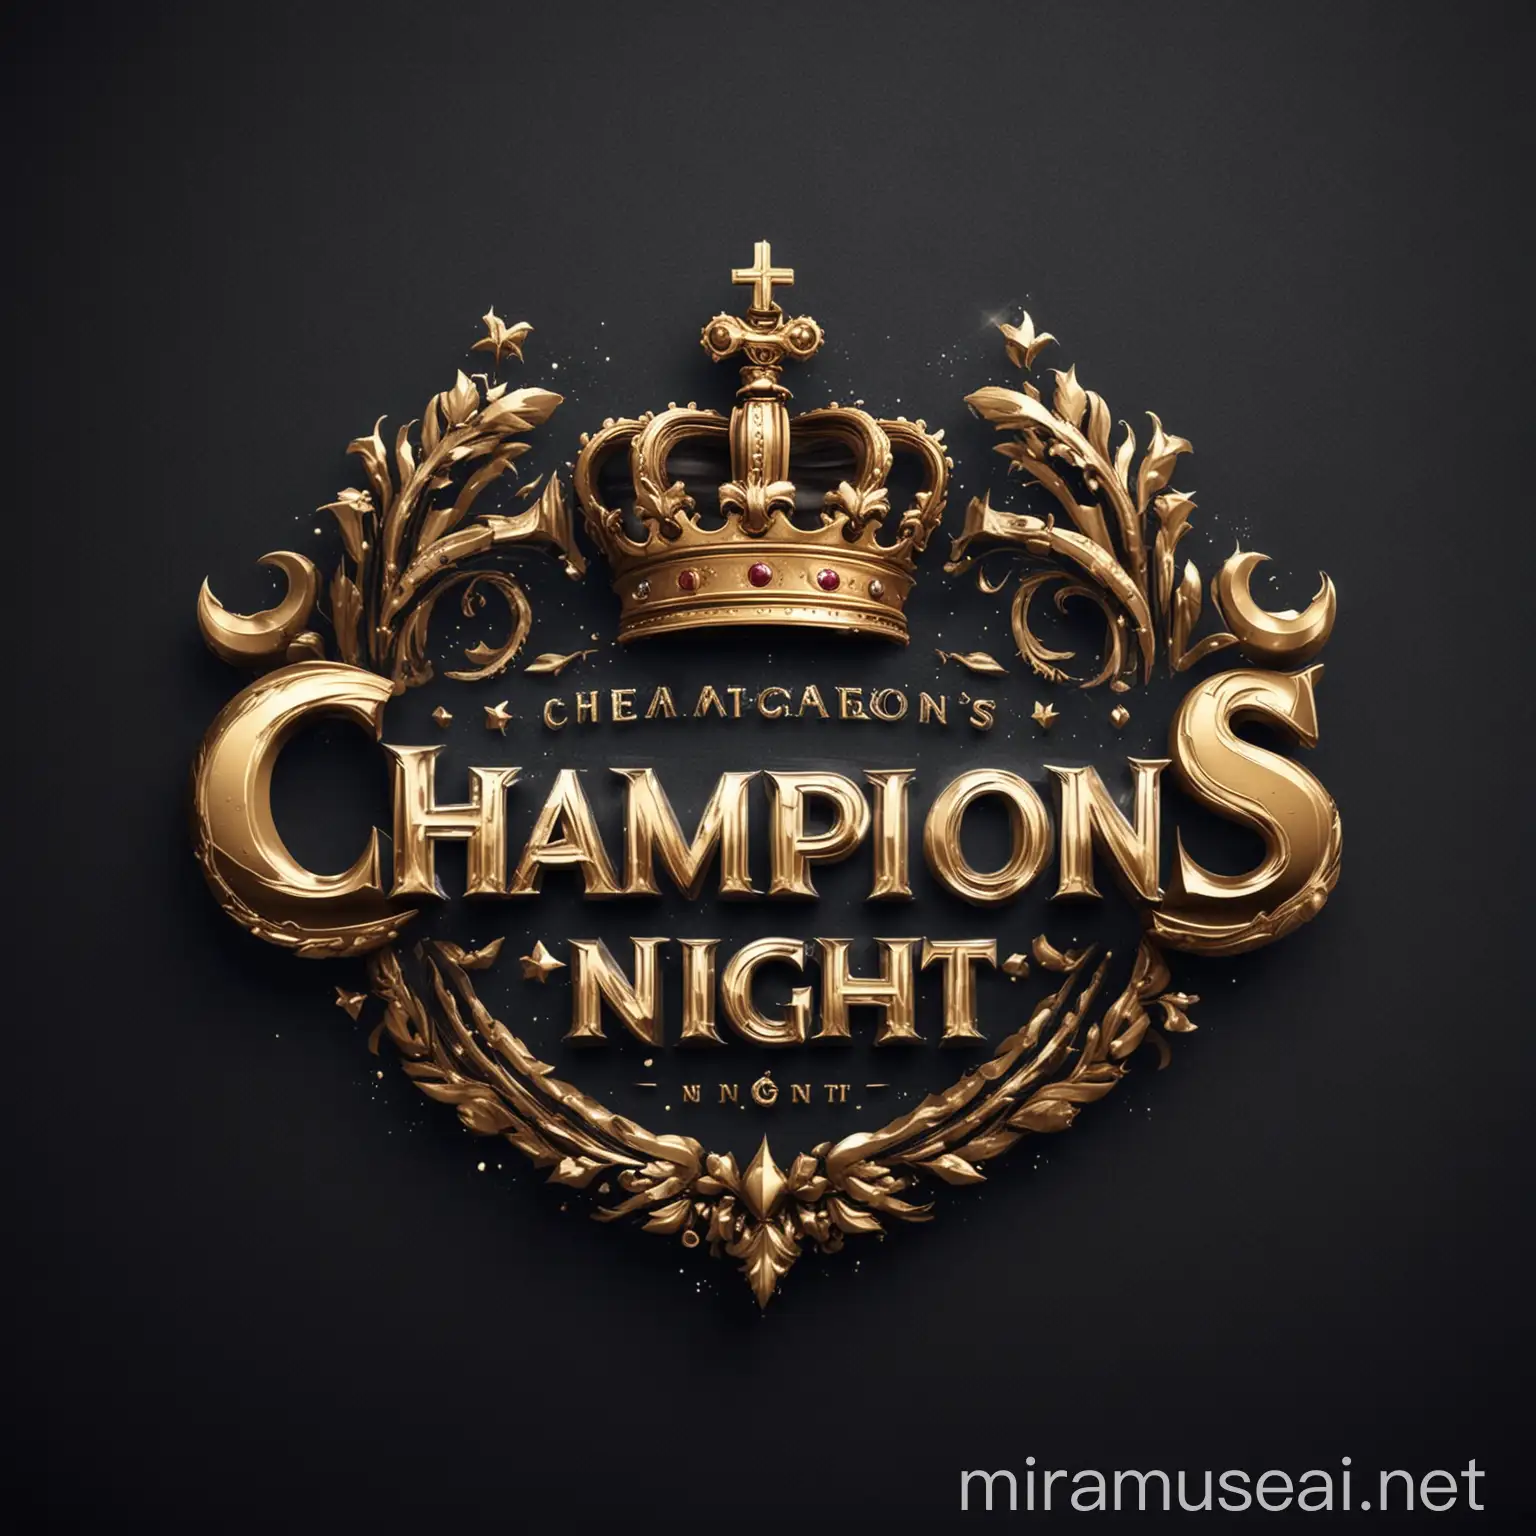 need a logo for champions night event,
attractive , royal look, clean and royal font  ,must be represent class 
on white background
